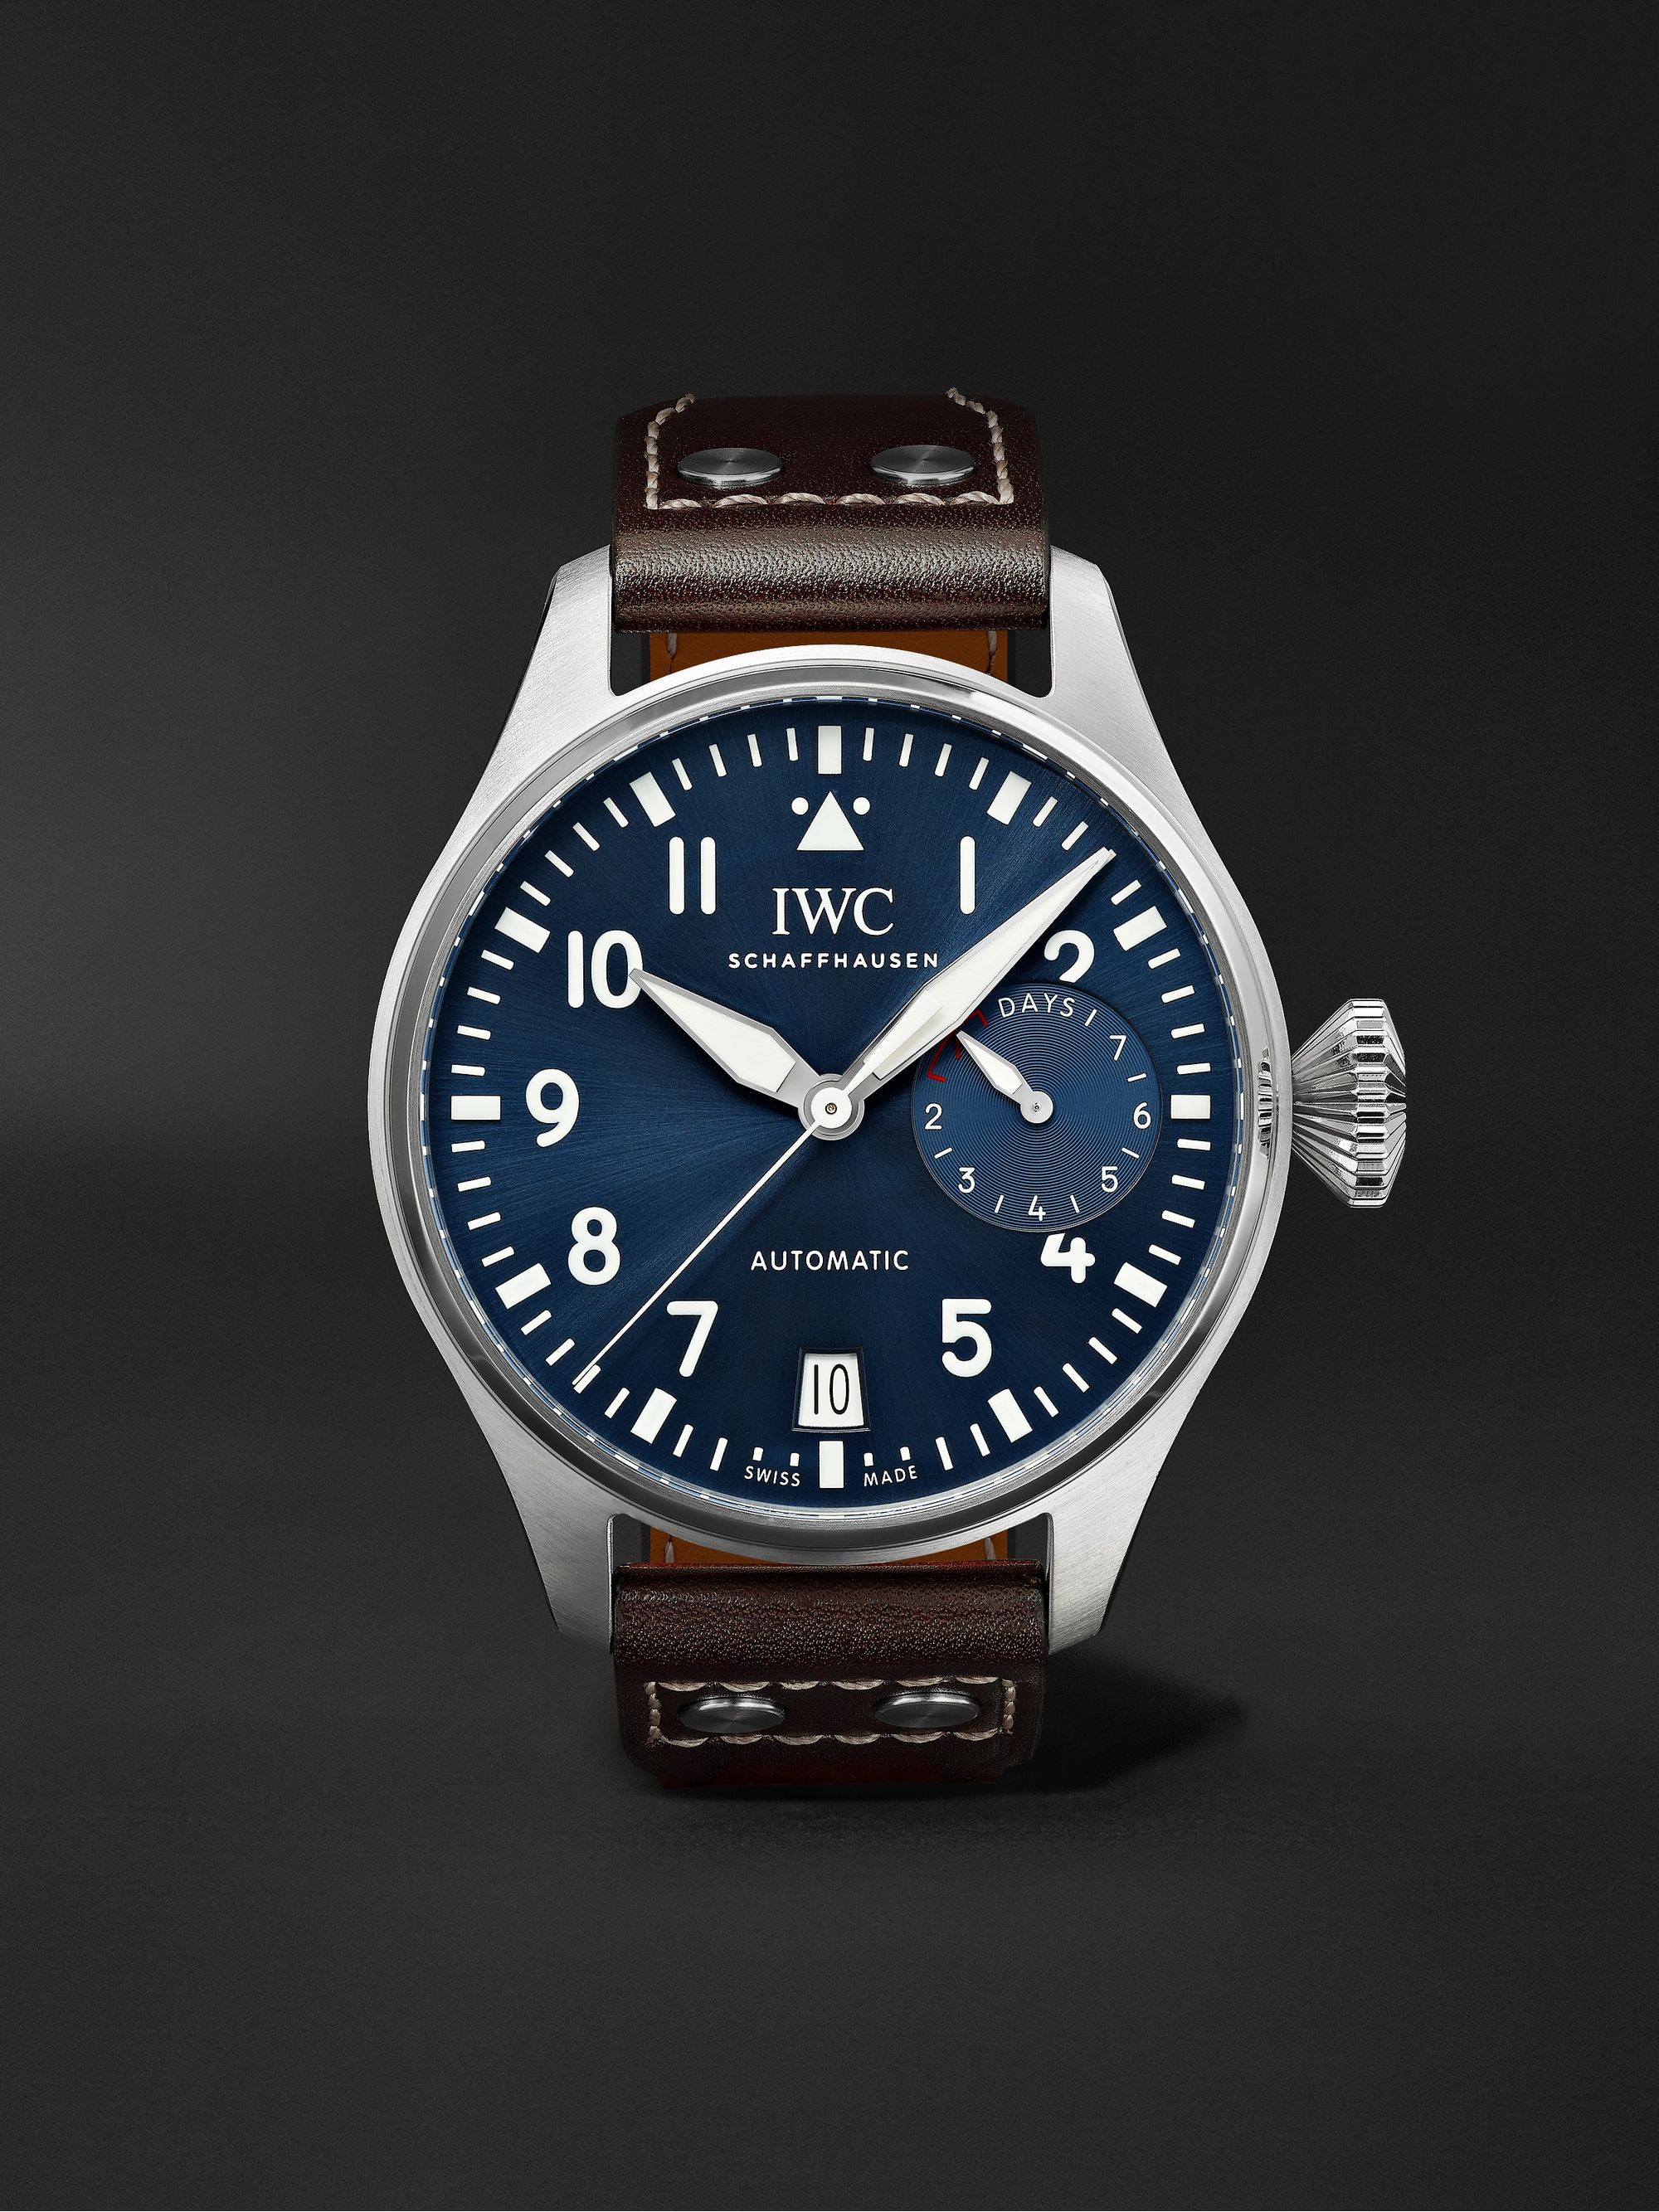 IWC SCHAFFHAUSEN Big Pilot's Le Petit Prince Automatic 46mm Stainless Steel and Leather Watch, Ref. No. IW501002